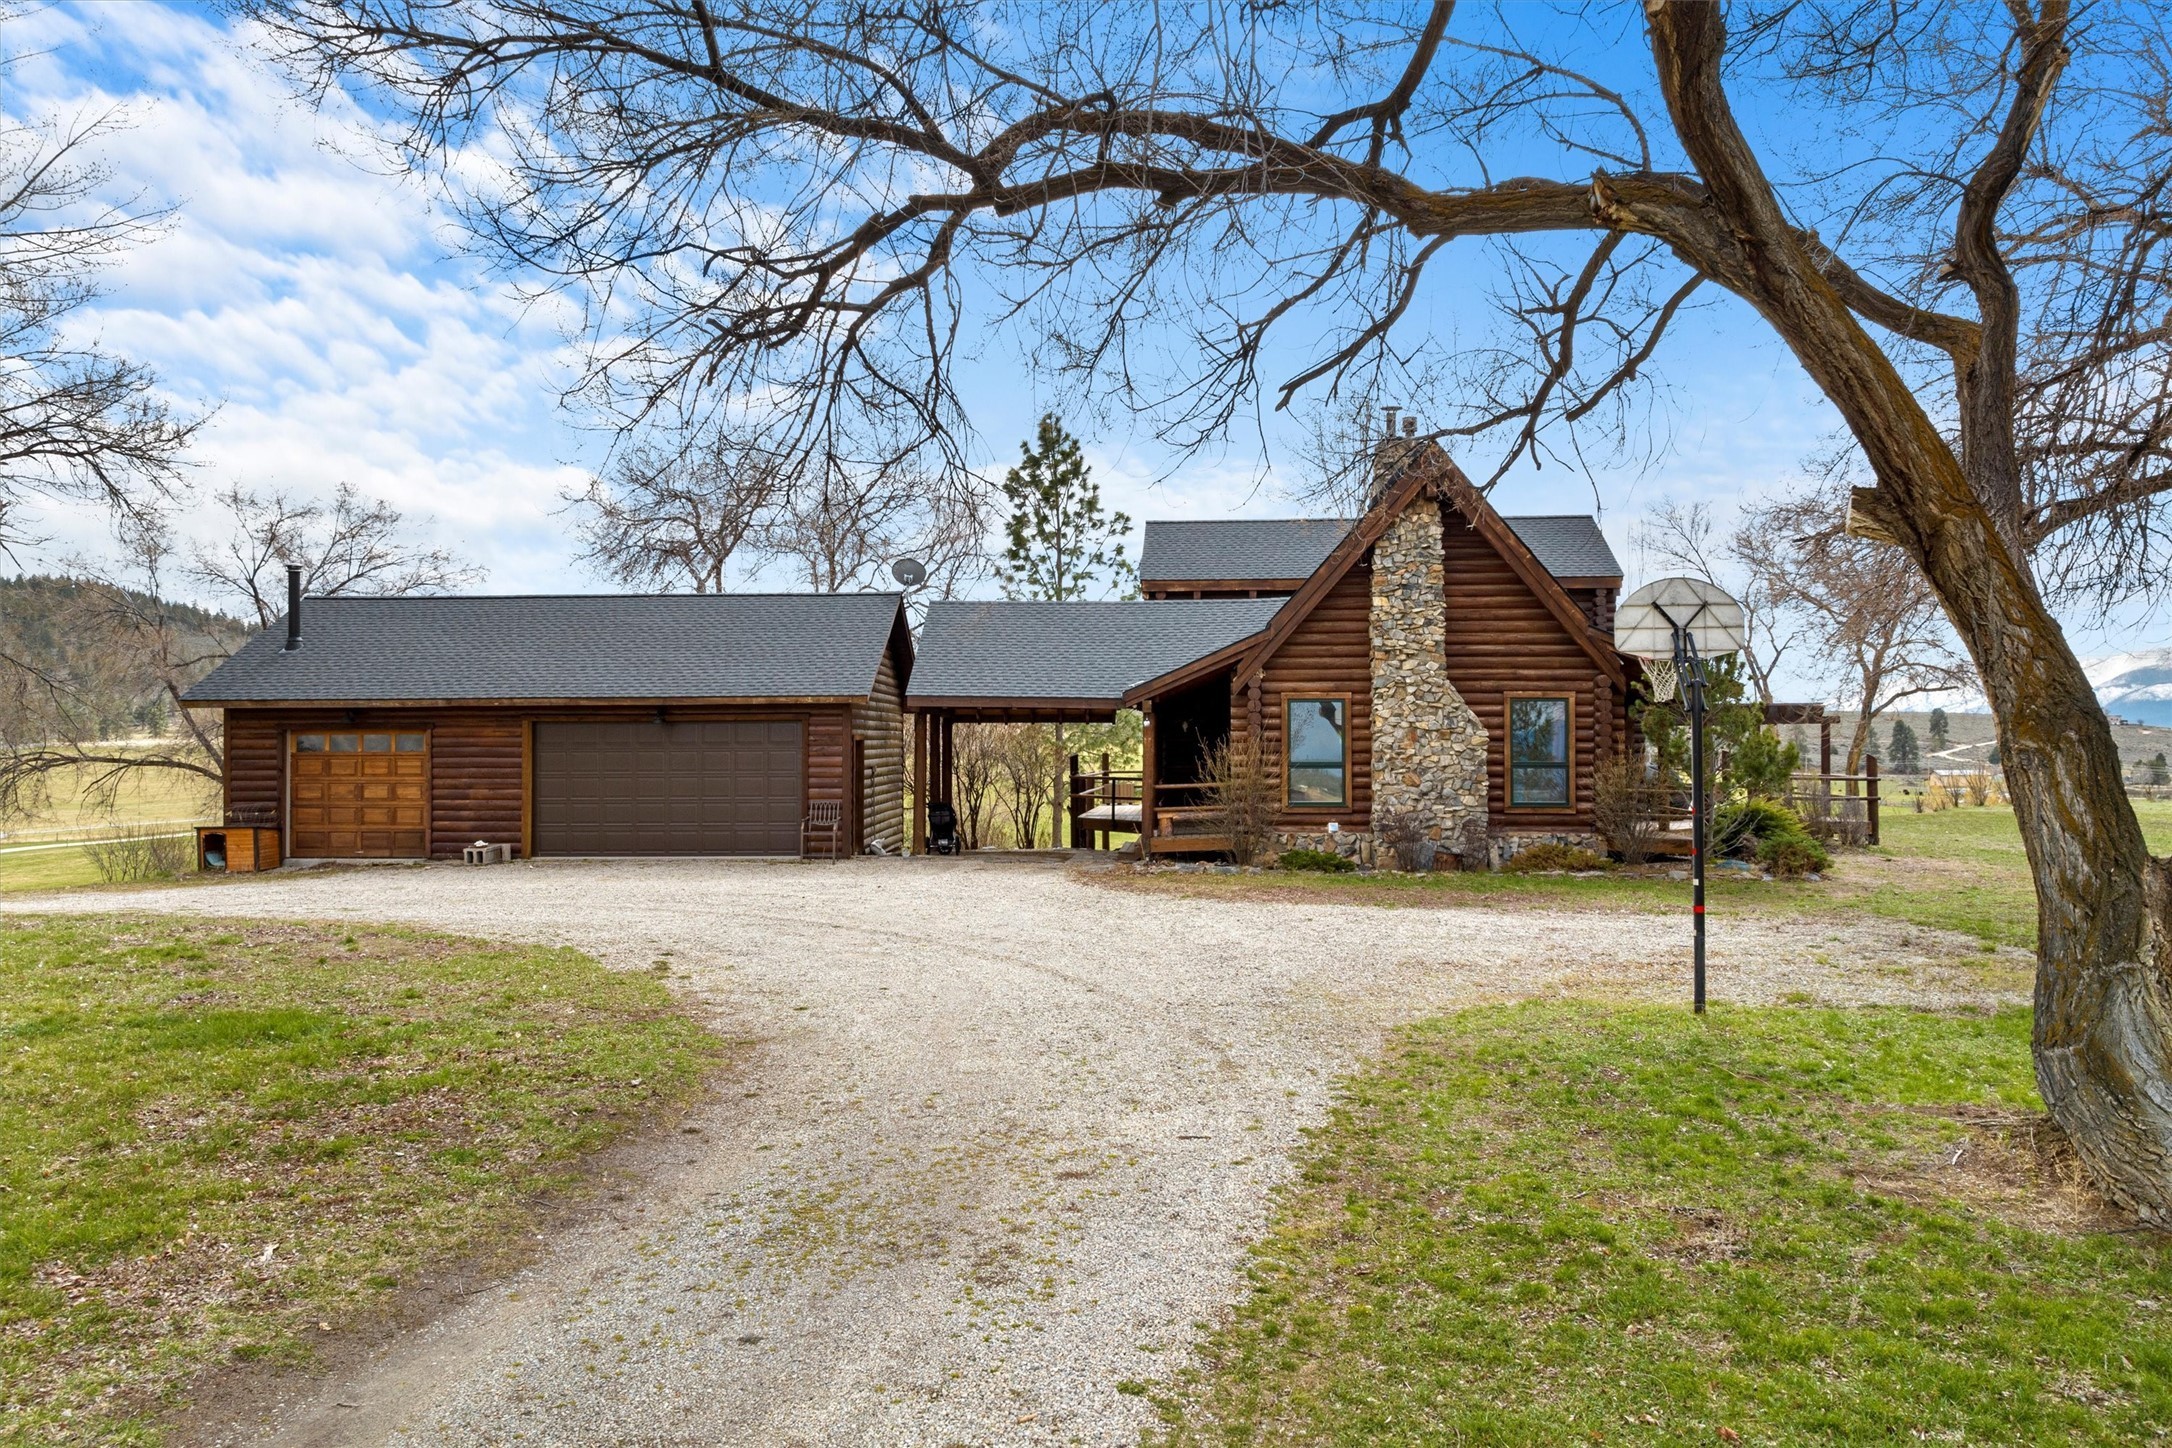 2. 2478 Home Acres Road